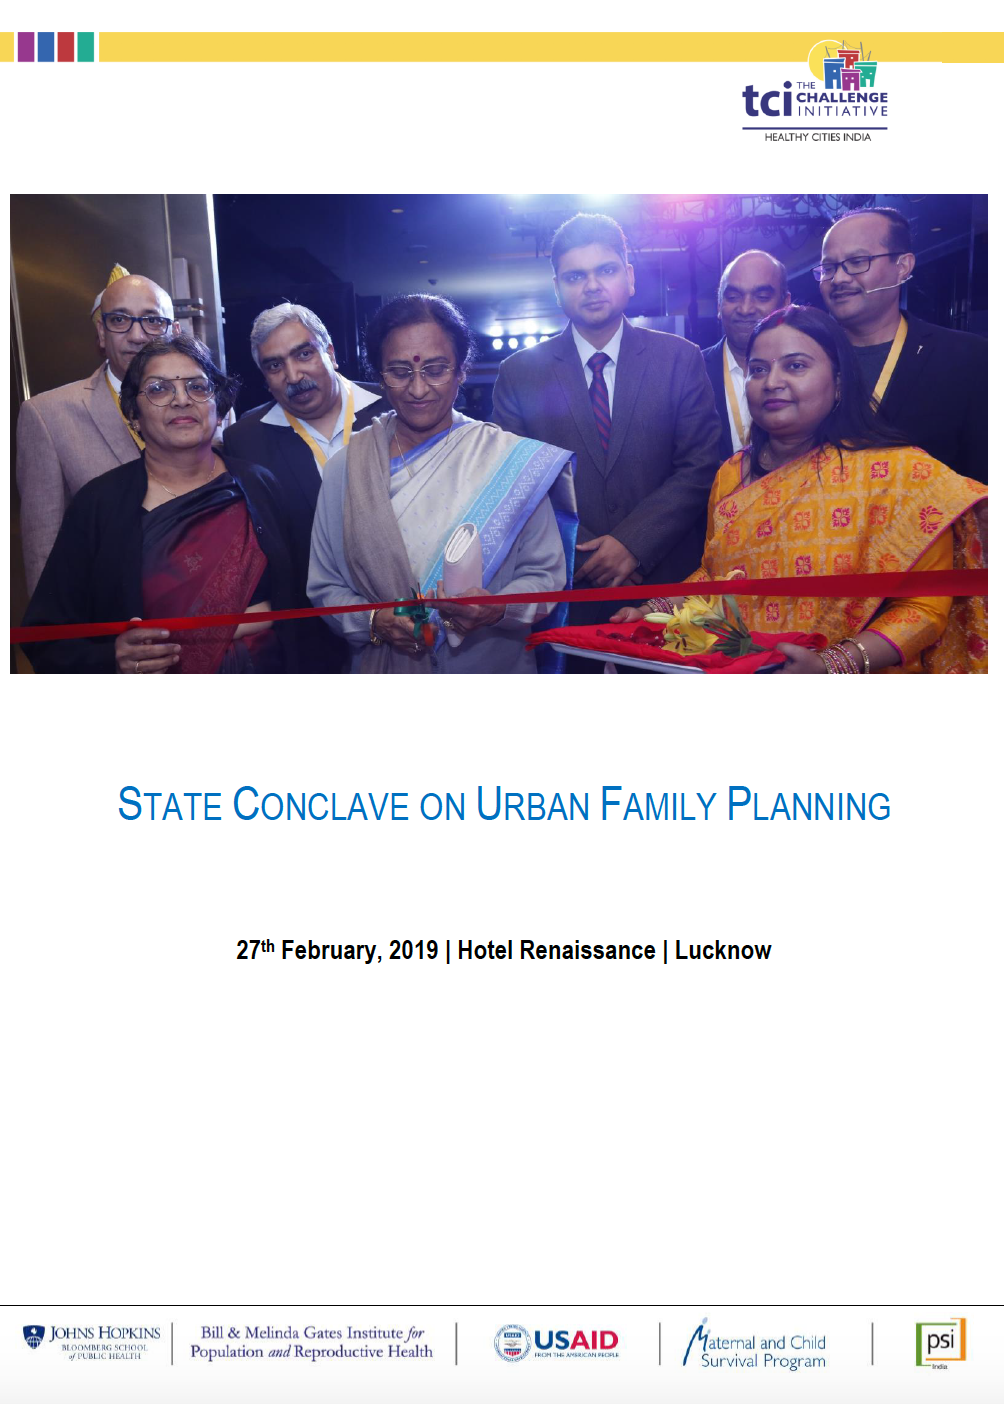 UP State Conclave on Urban Family Planning, 27 February 2019